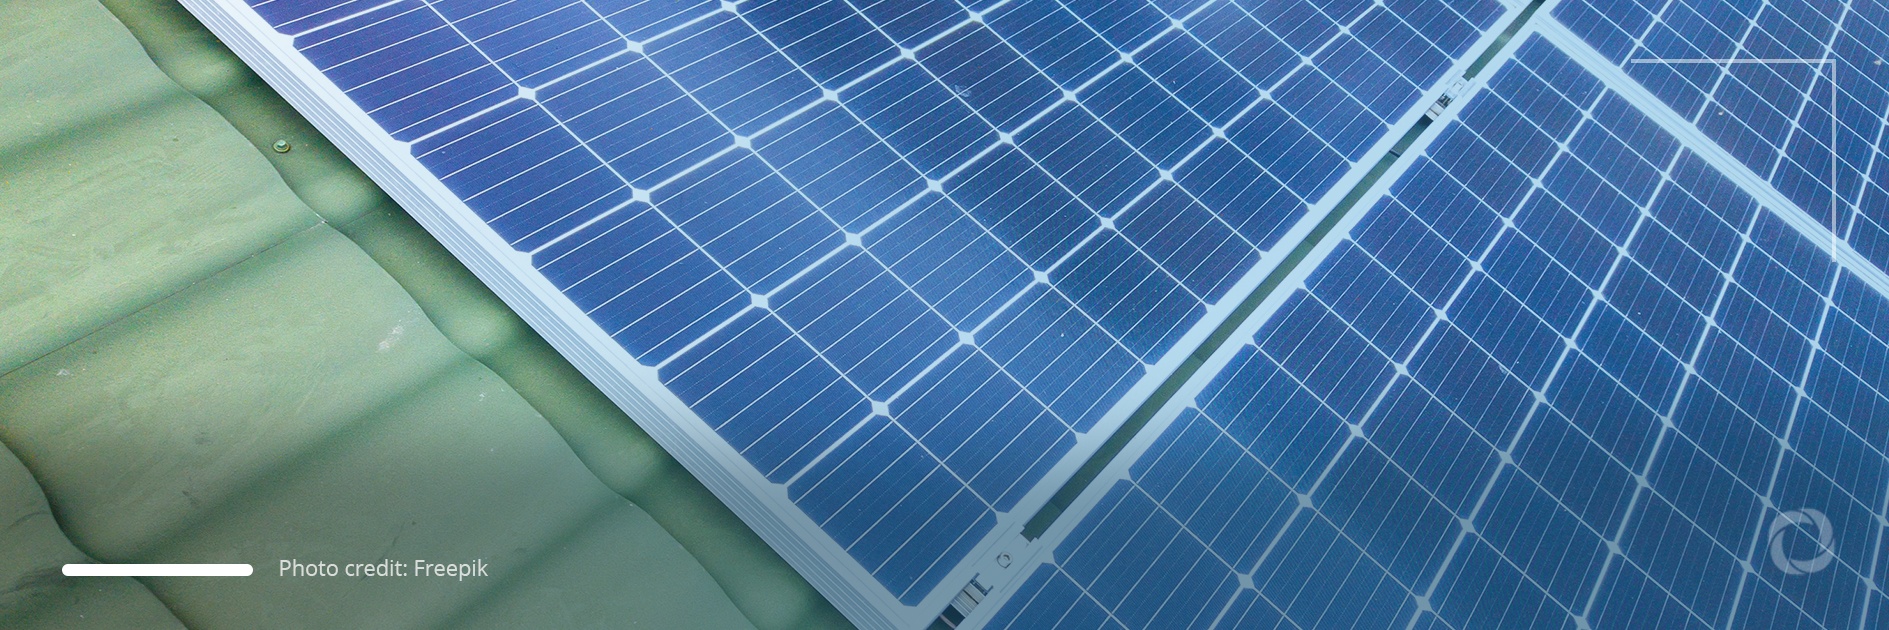 Evolution of rooftop photovoltaic systems